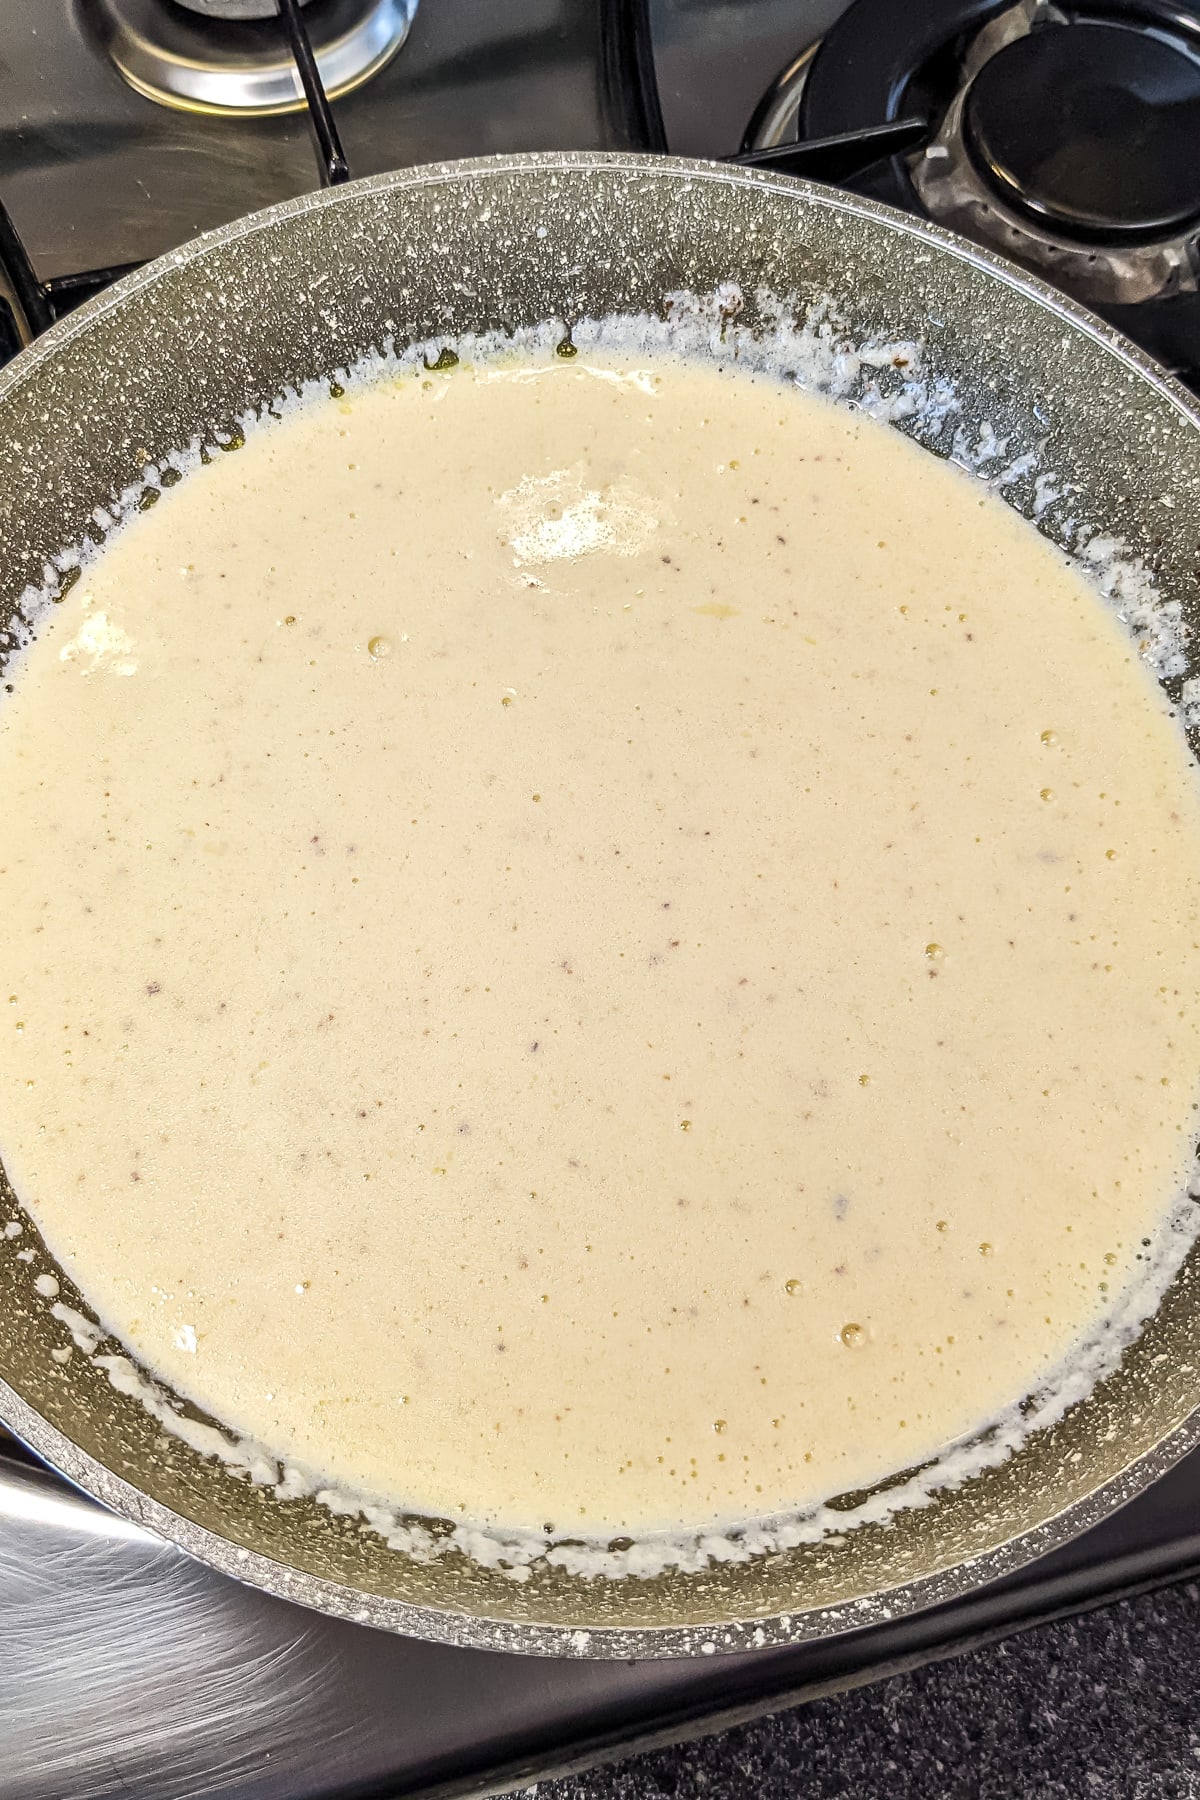 Top view of a sauce pan with cooked alfredo sauce with half and half.